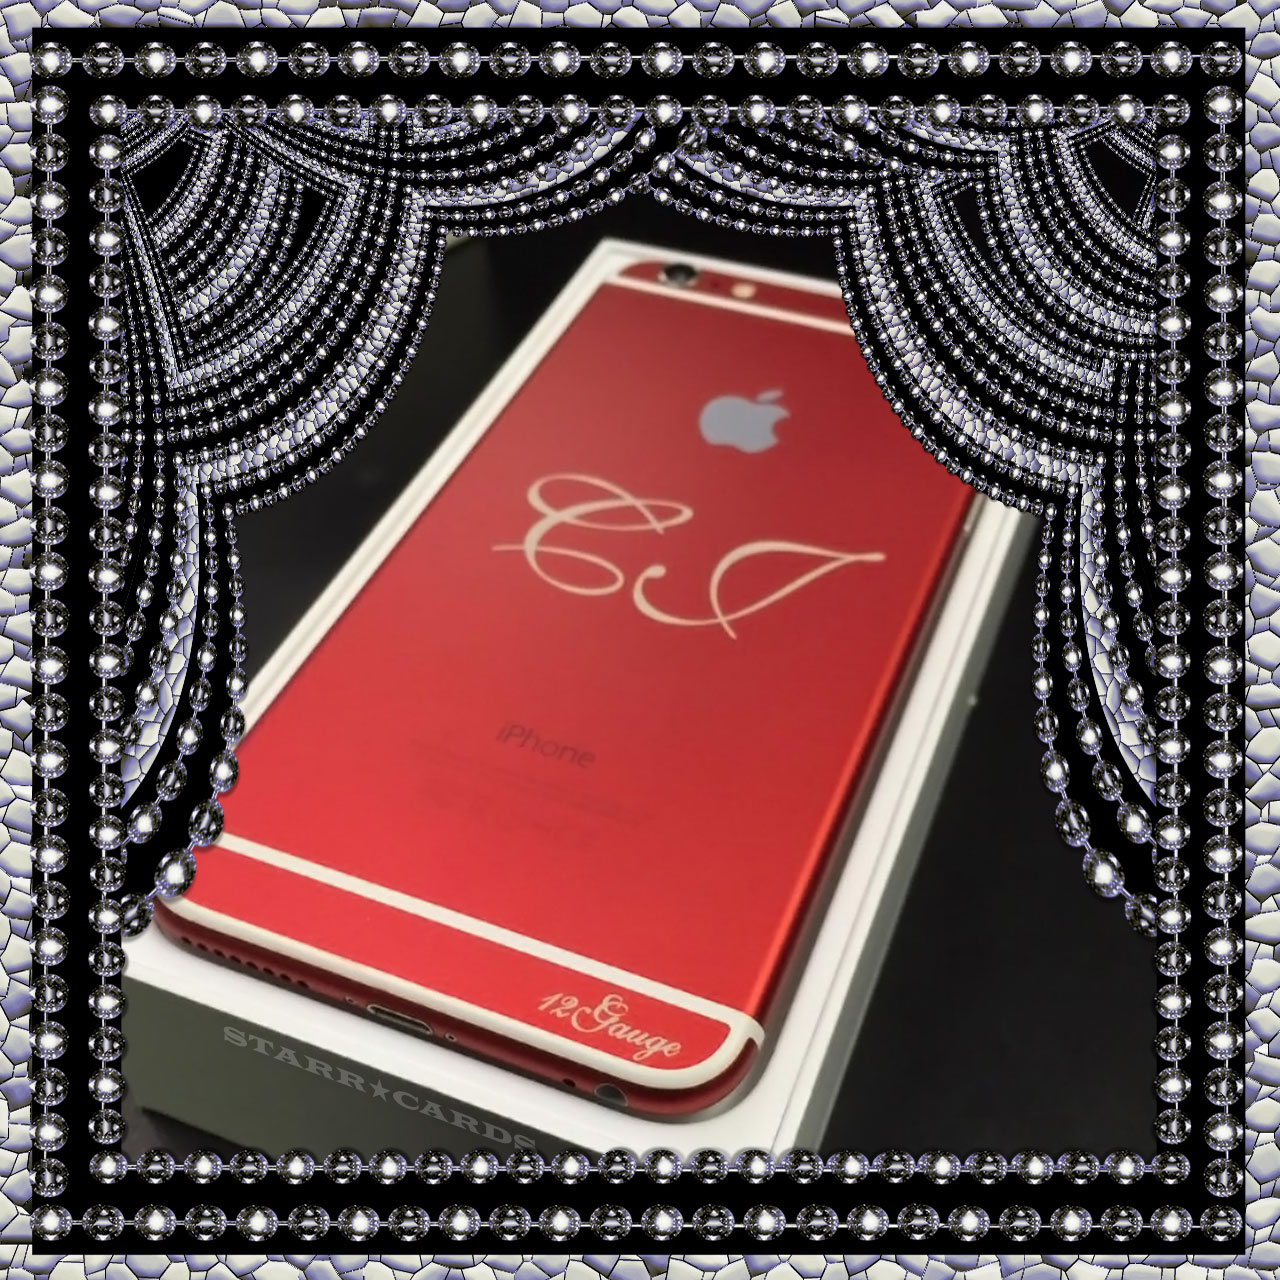 Cardale Jones custom iPhone with Ohio State colors